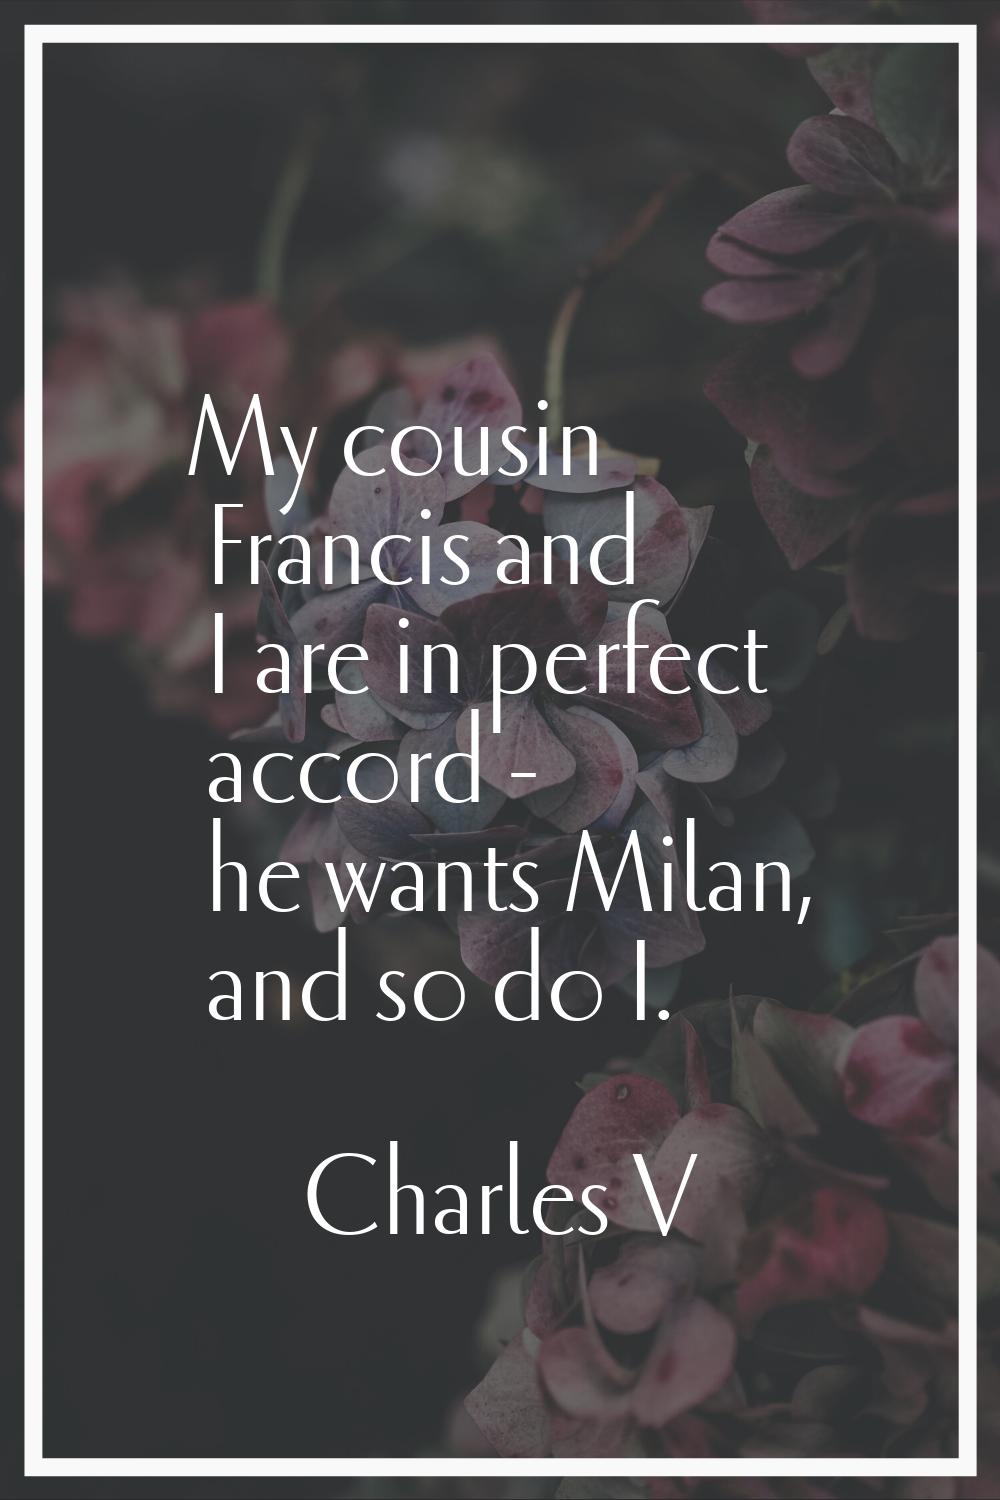 My cousin Francis and I are in perfect accord - he wants Milan, and so do I.